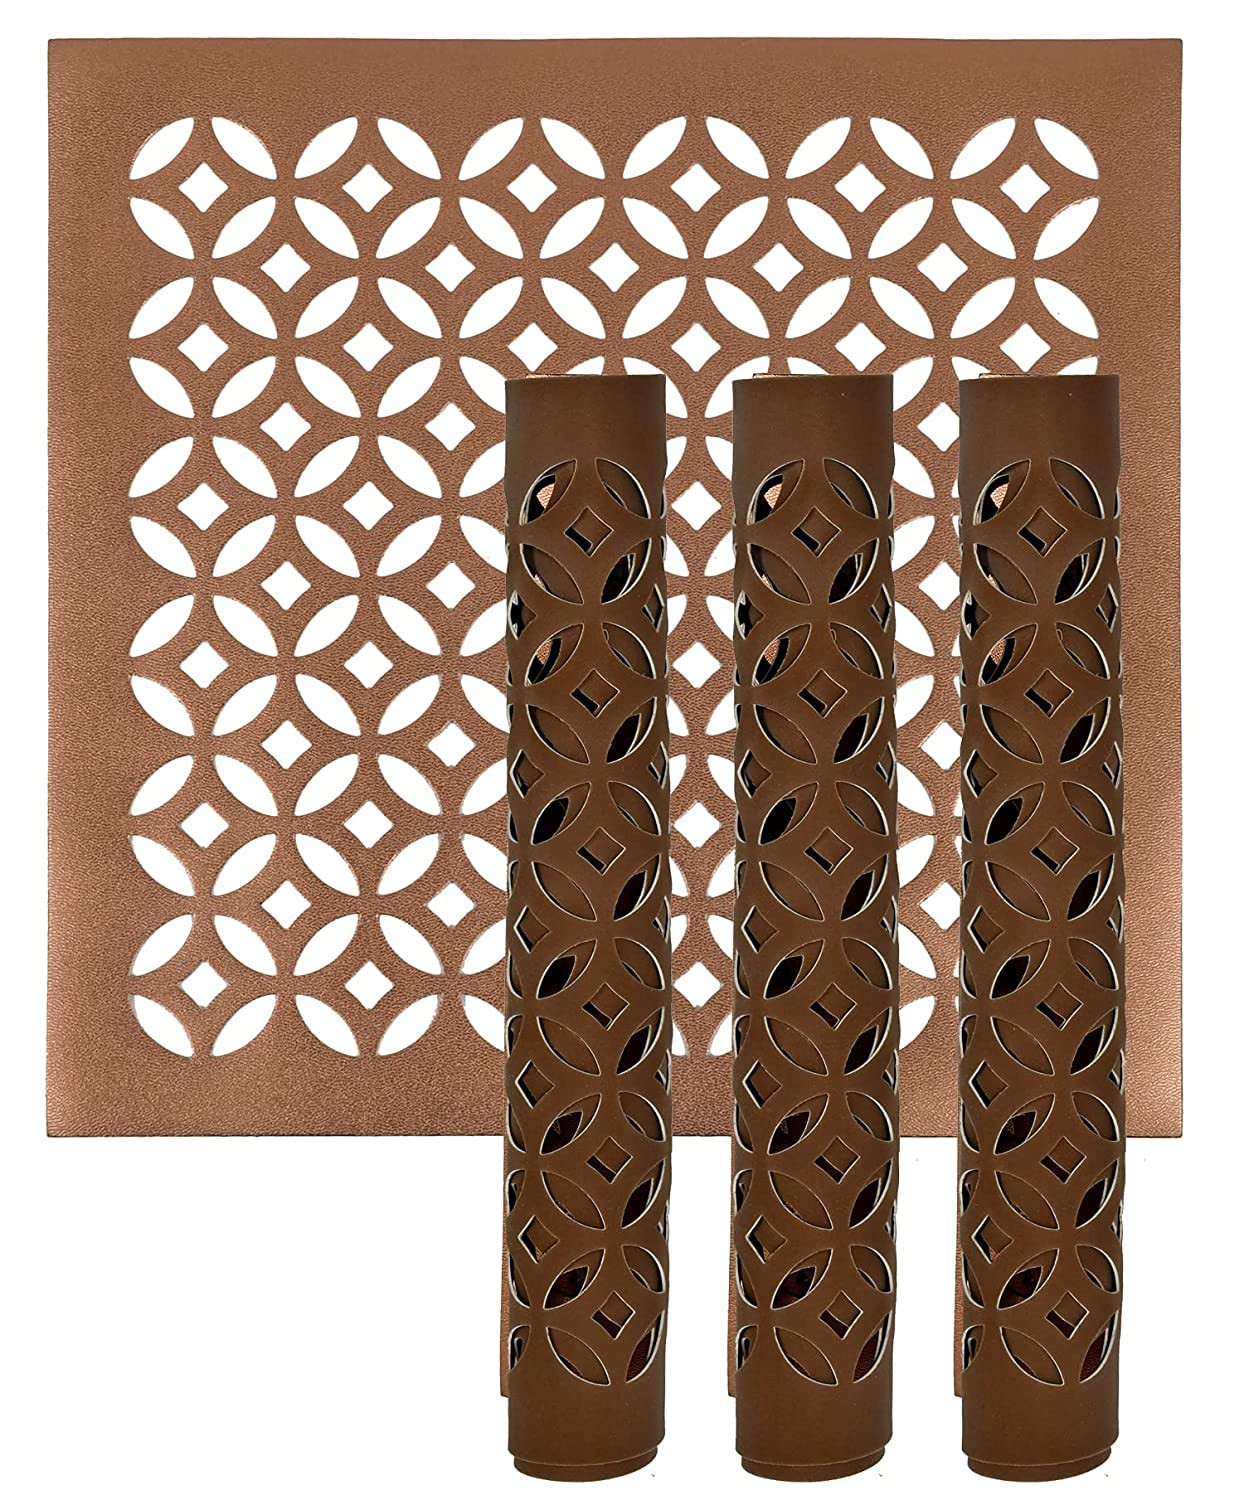 Kuber Industries Placemats for Dining Table|Arccircle Pattern Table Placemats for Kitchen|PVC Heat Resistant Table Placemats 12x12 Inch|Set of 6 (Copper)